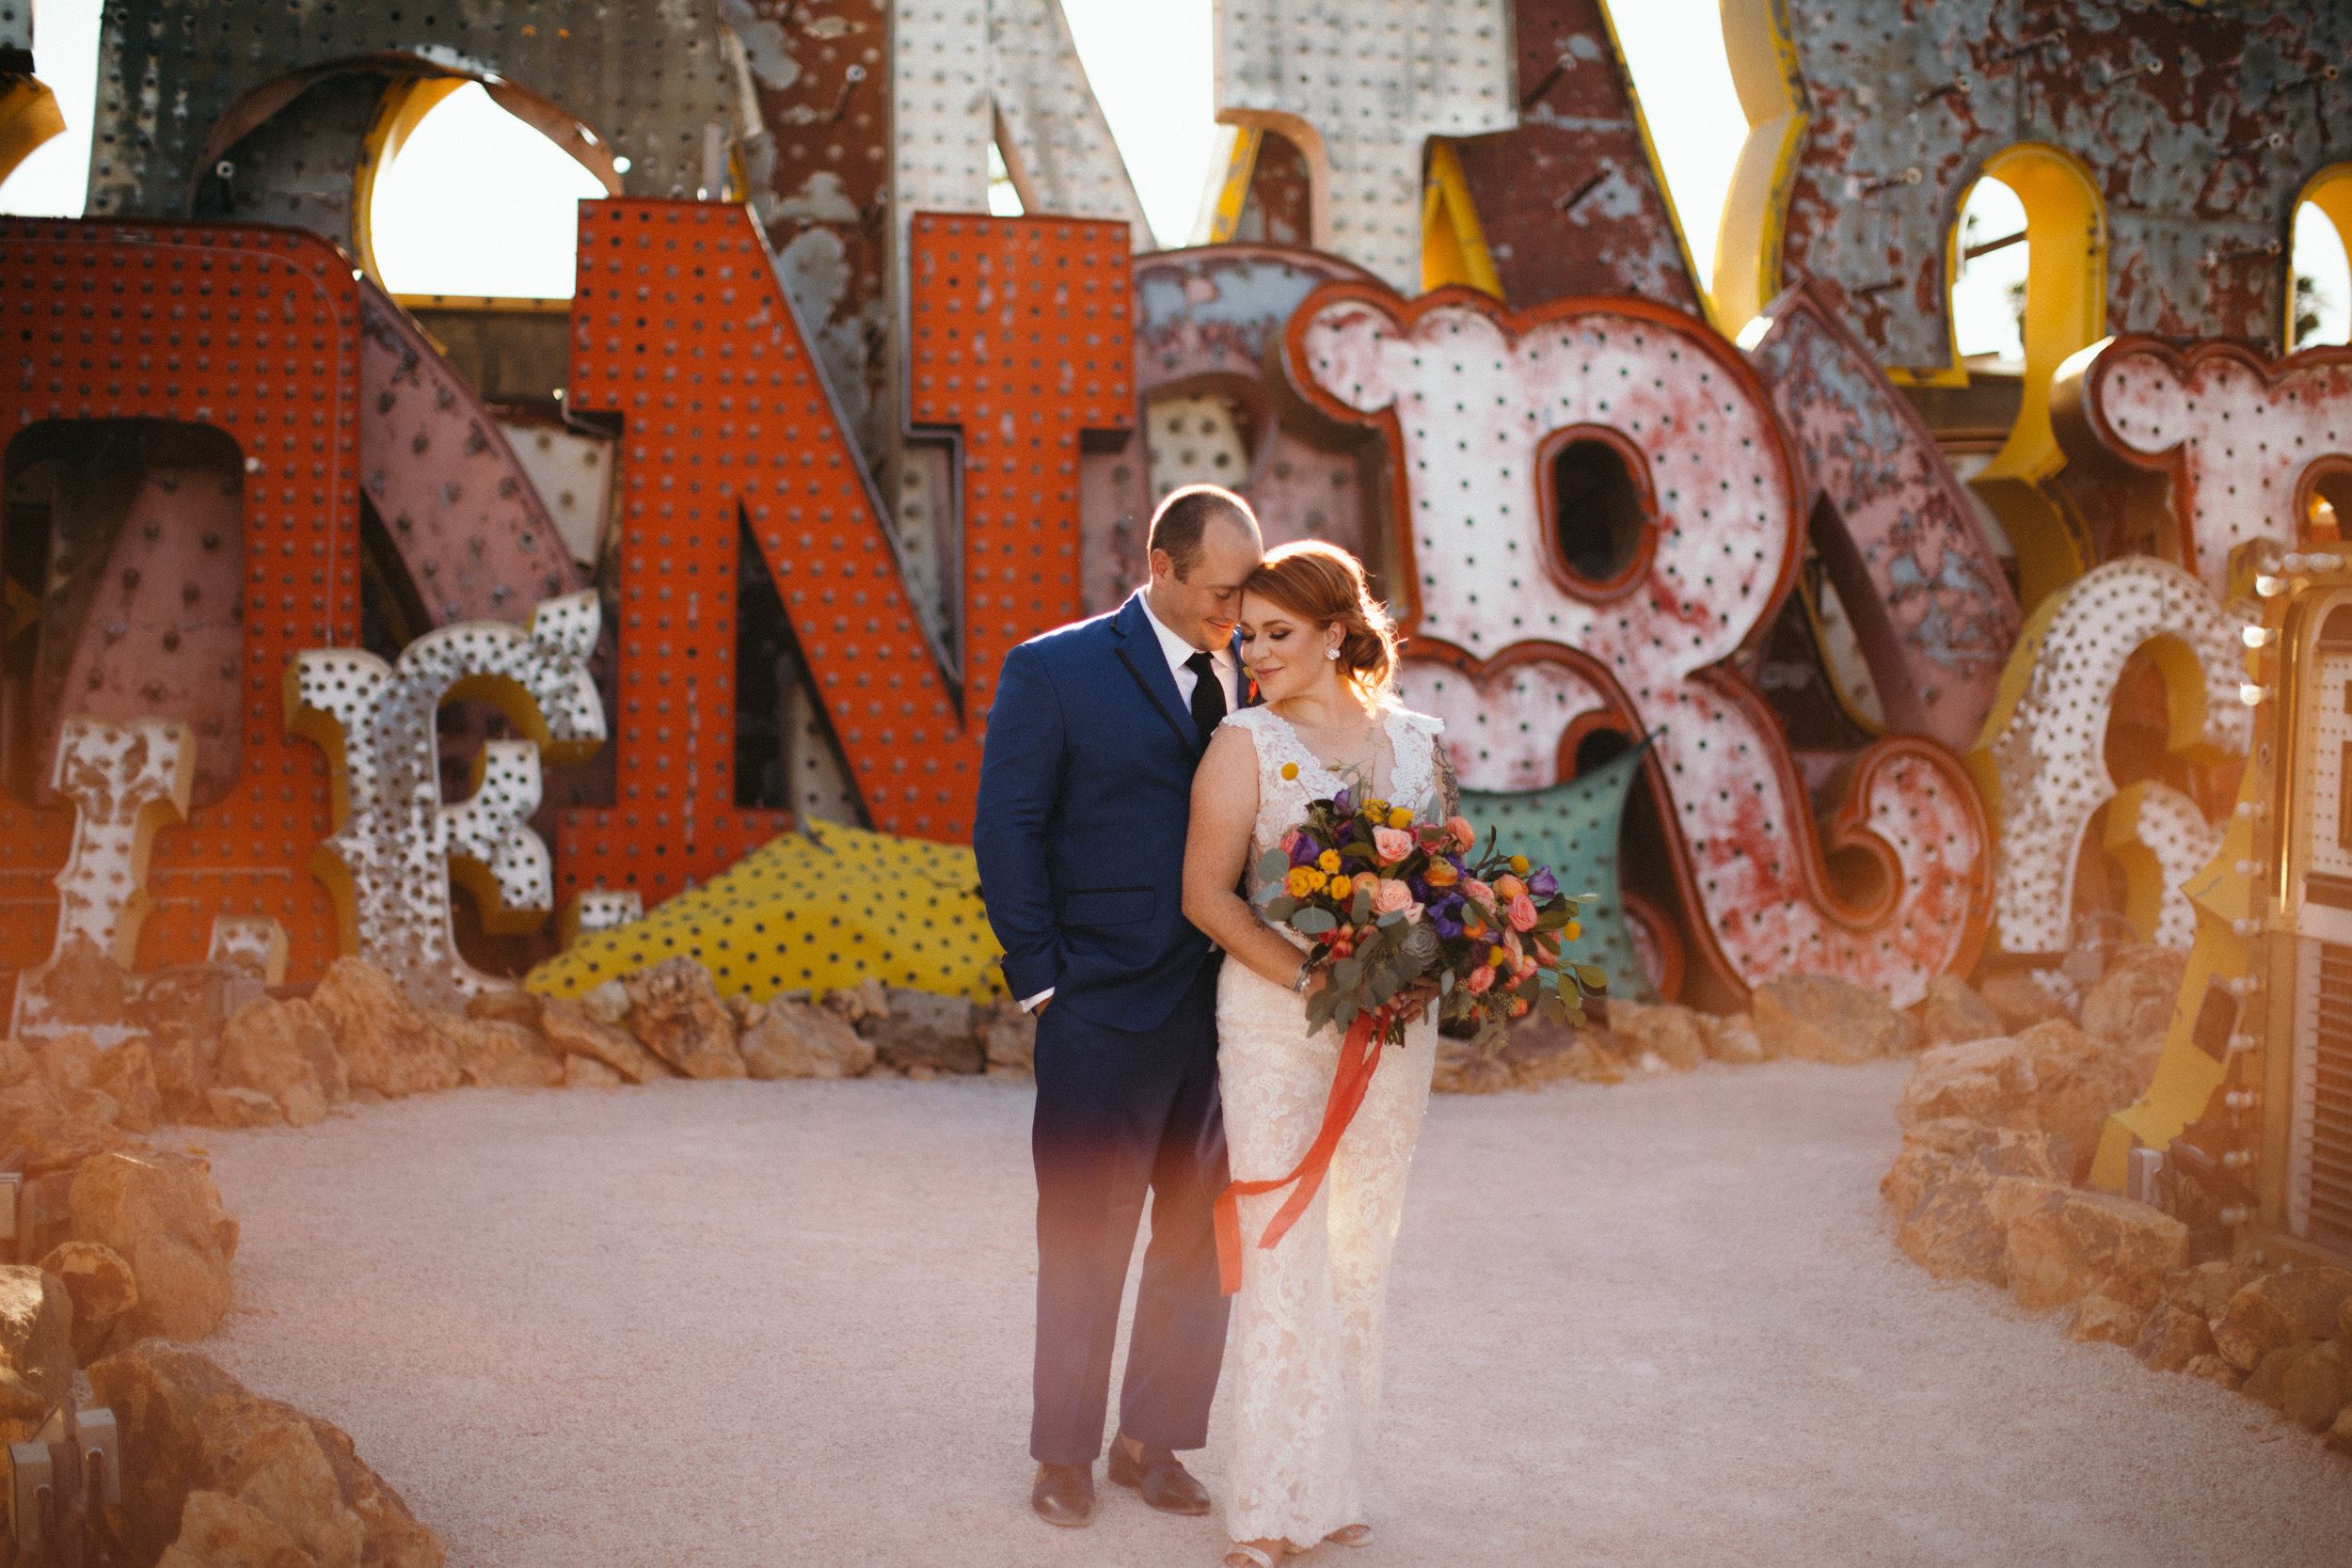 Bride and groom standing in front of large vintage signs.